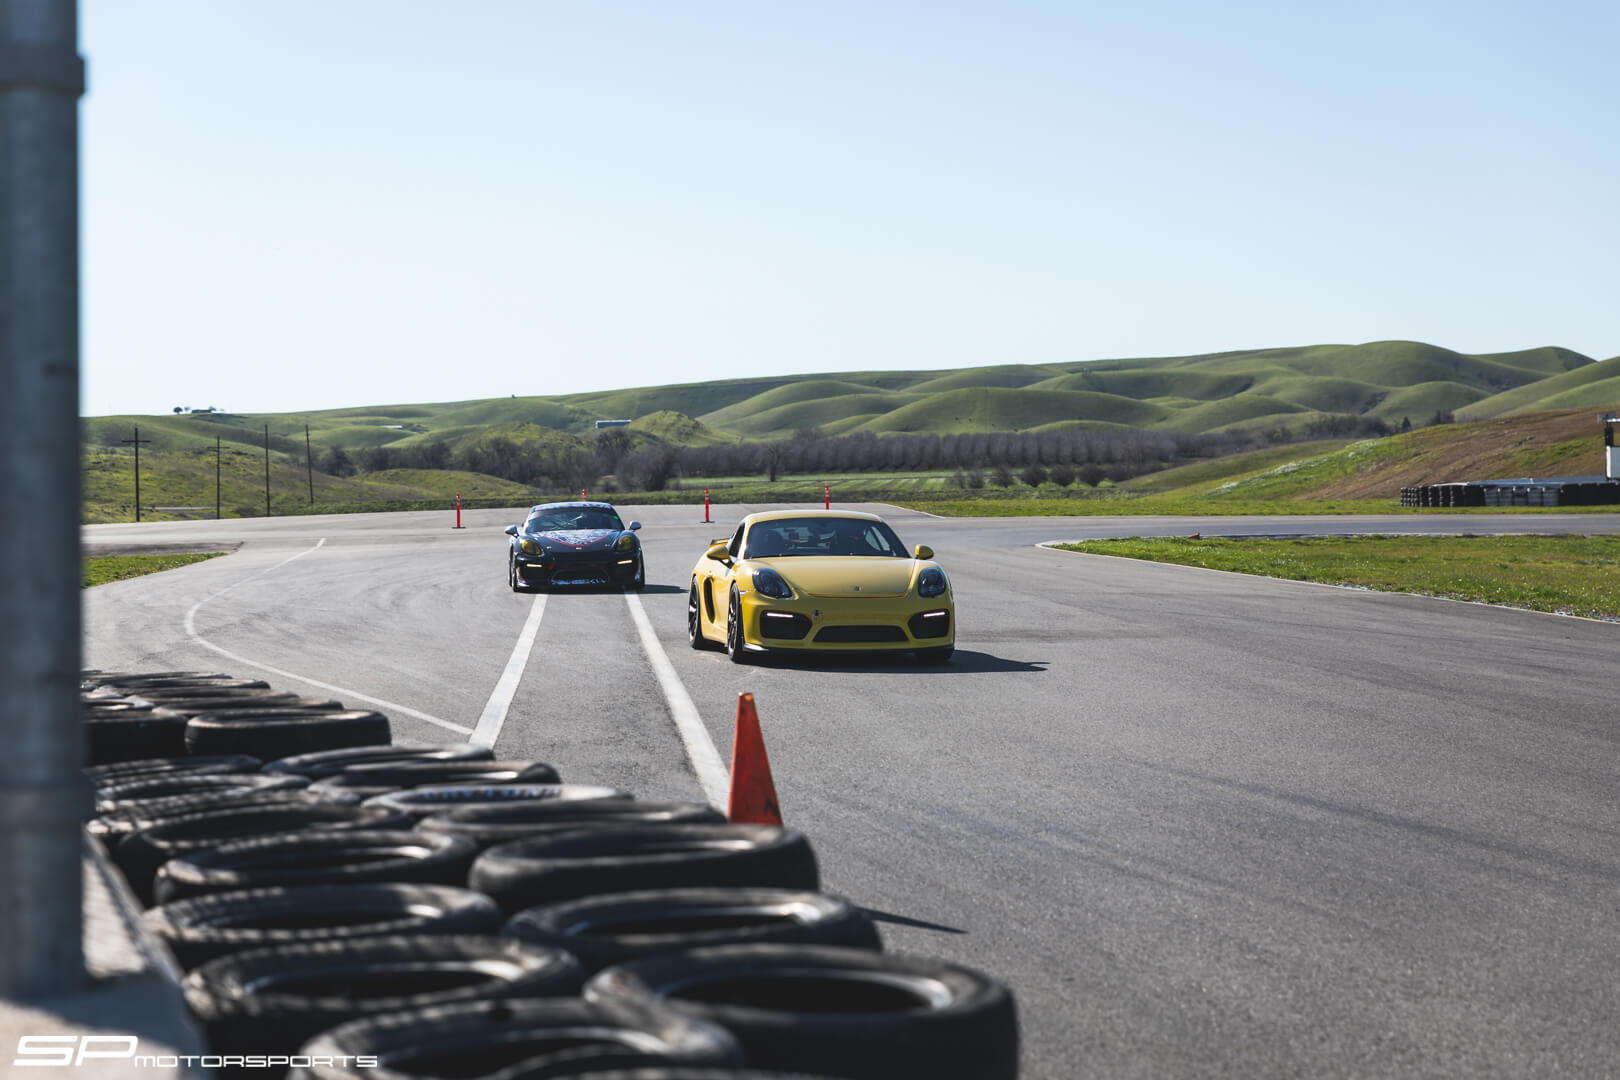 SP Motorsports Arrive and Drive Car at Thunderhill